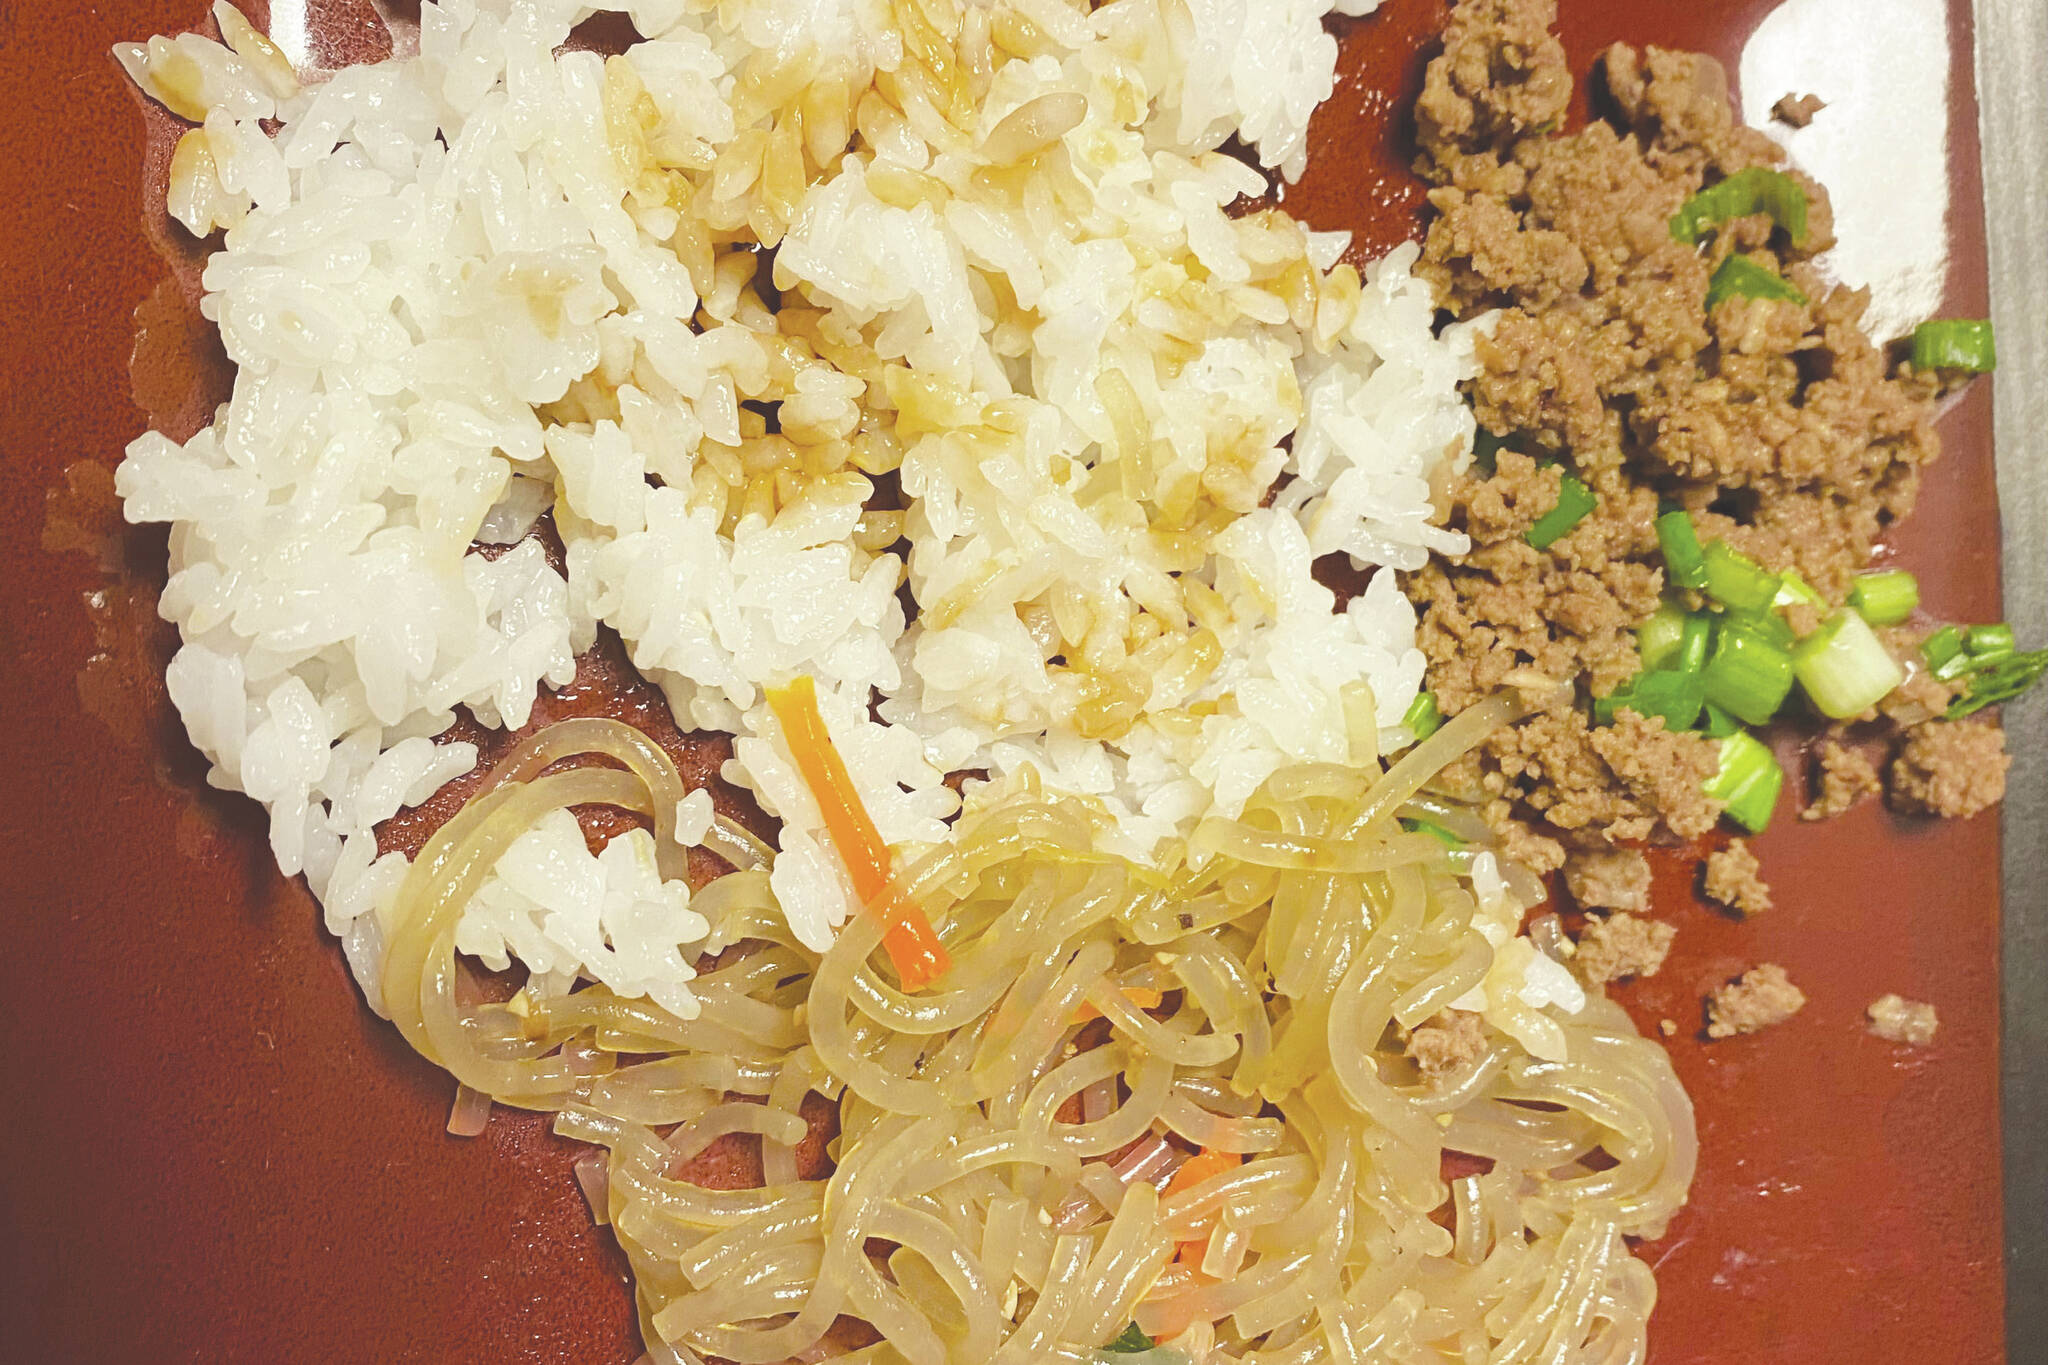 Photo by Tressa Dale/Peninsula Clarion 
Ground Beef Bulkogi with sticky rice and noodles make a hearty Korean meal.